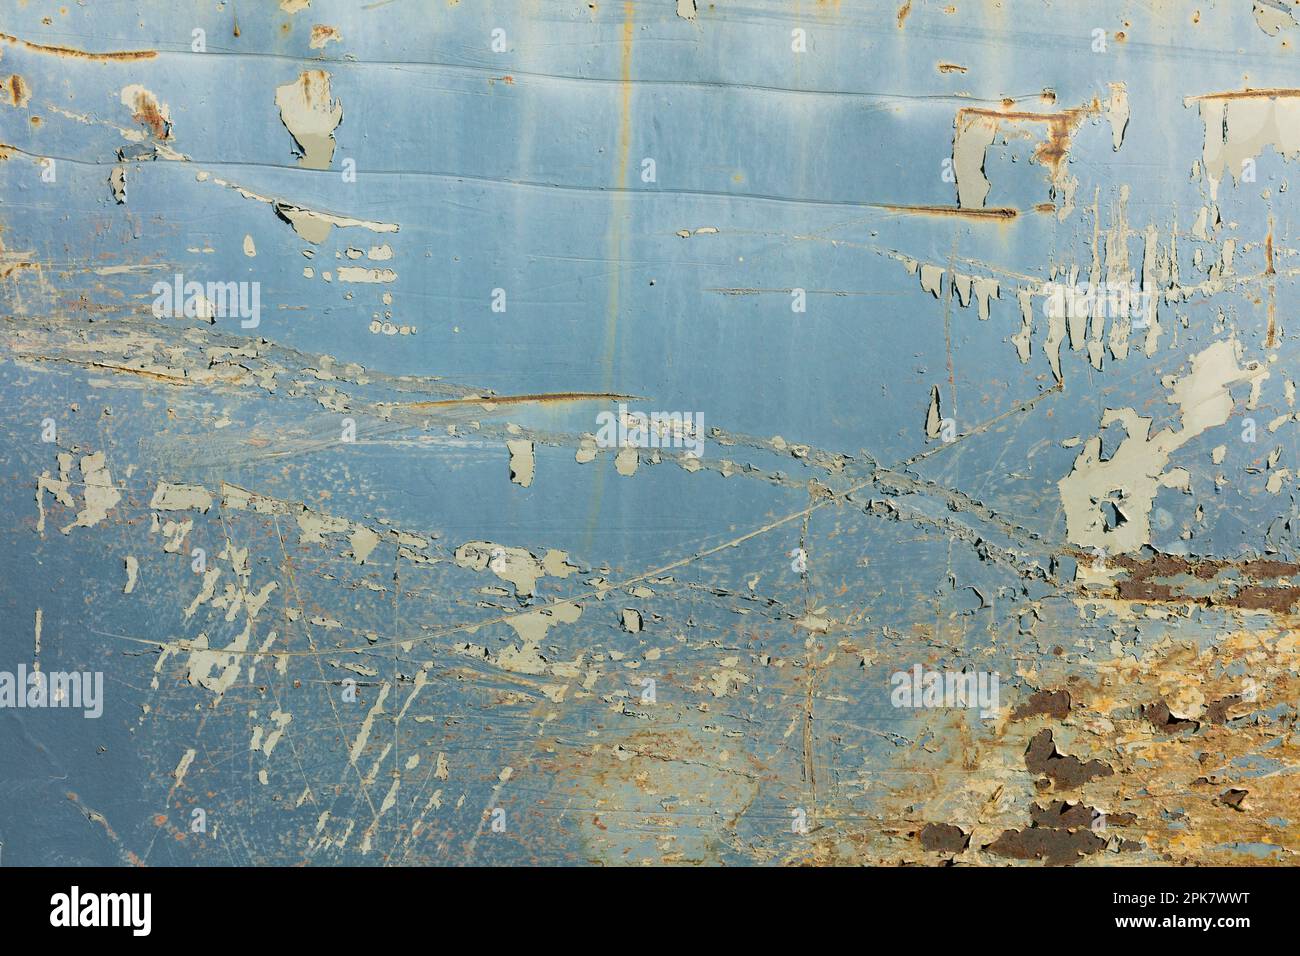 Marks and rust patterns on metal containers, close up. Stock Photo